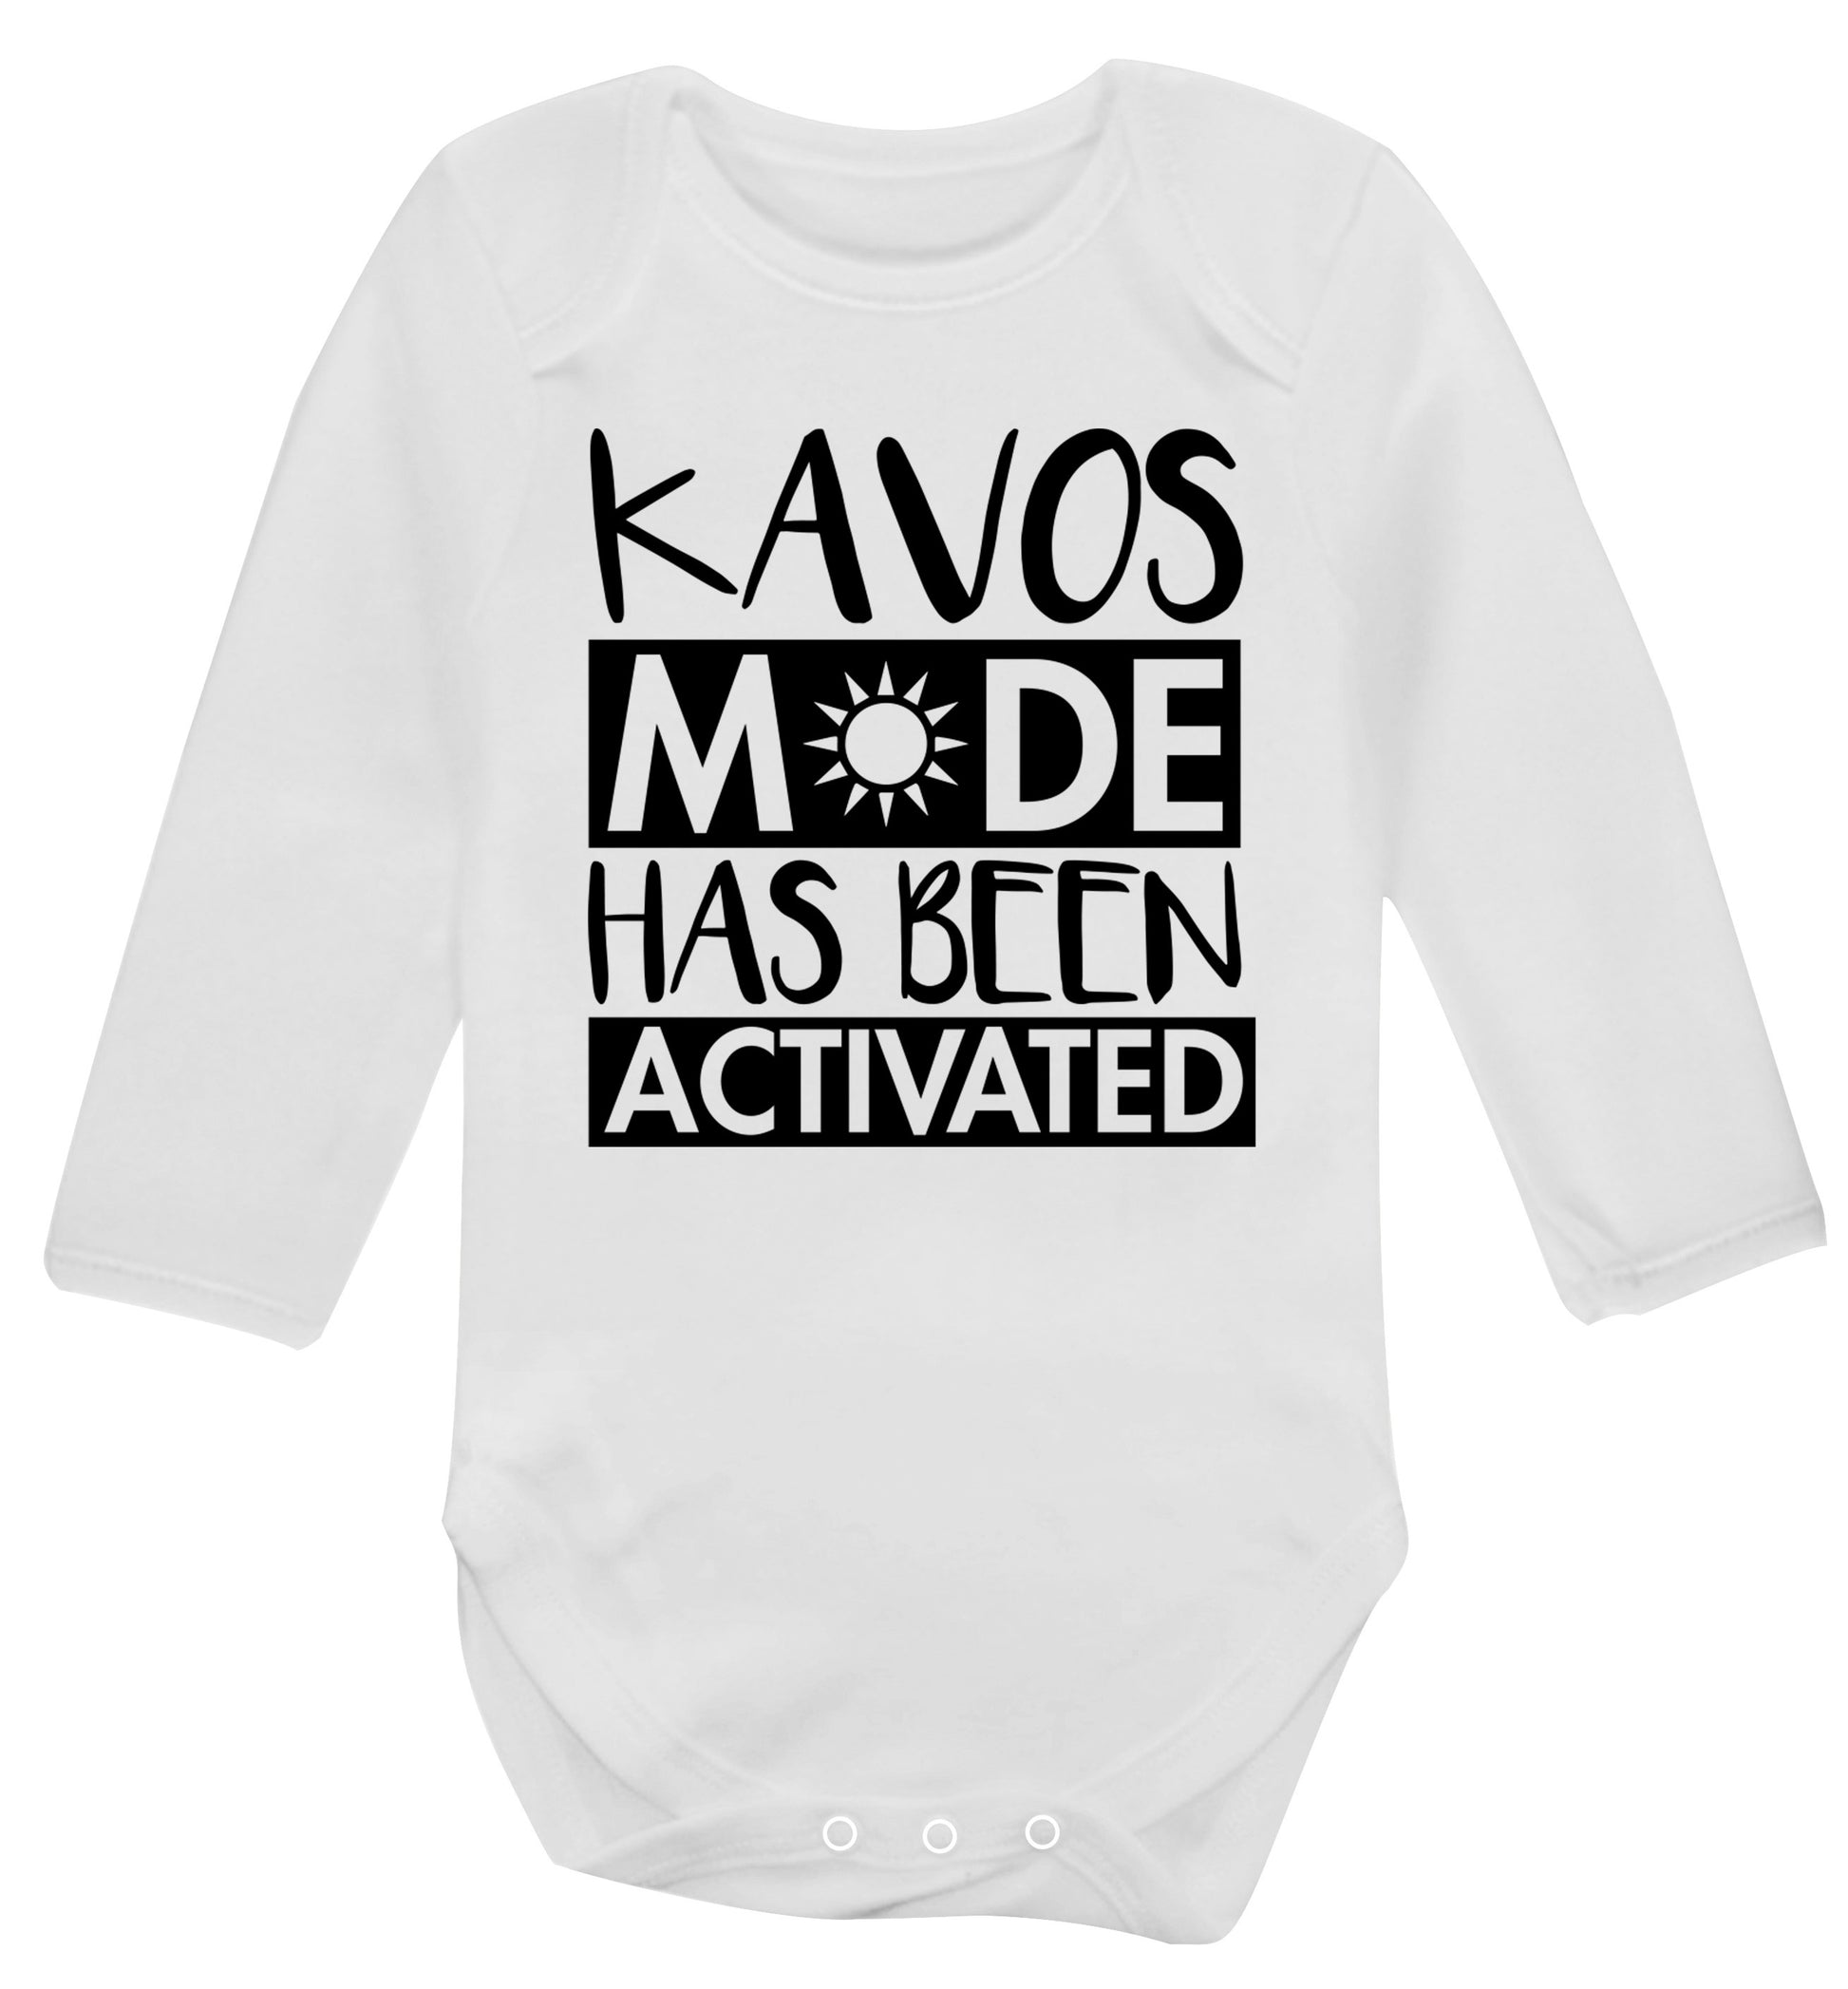 Kavos mode has been activated Baby Vest long sleeved white 6-12 months